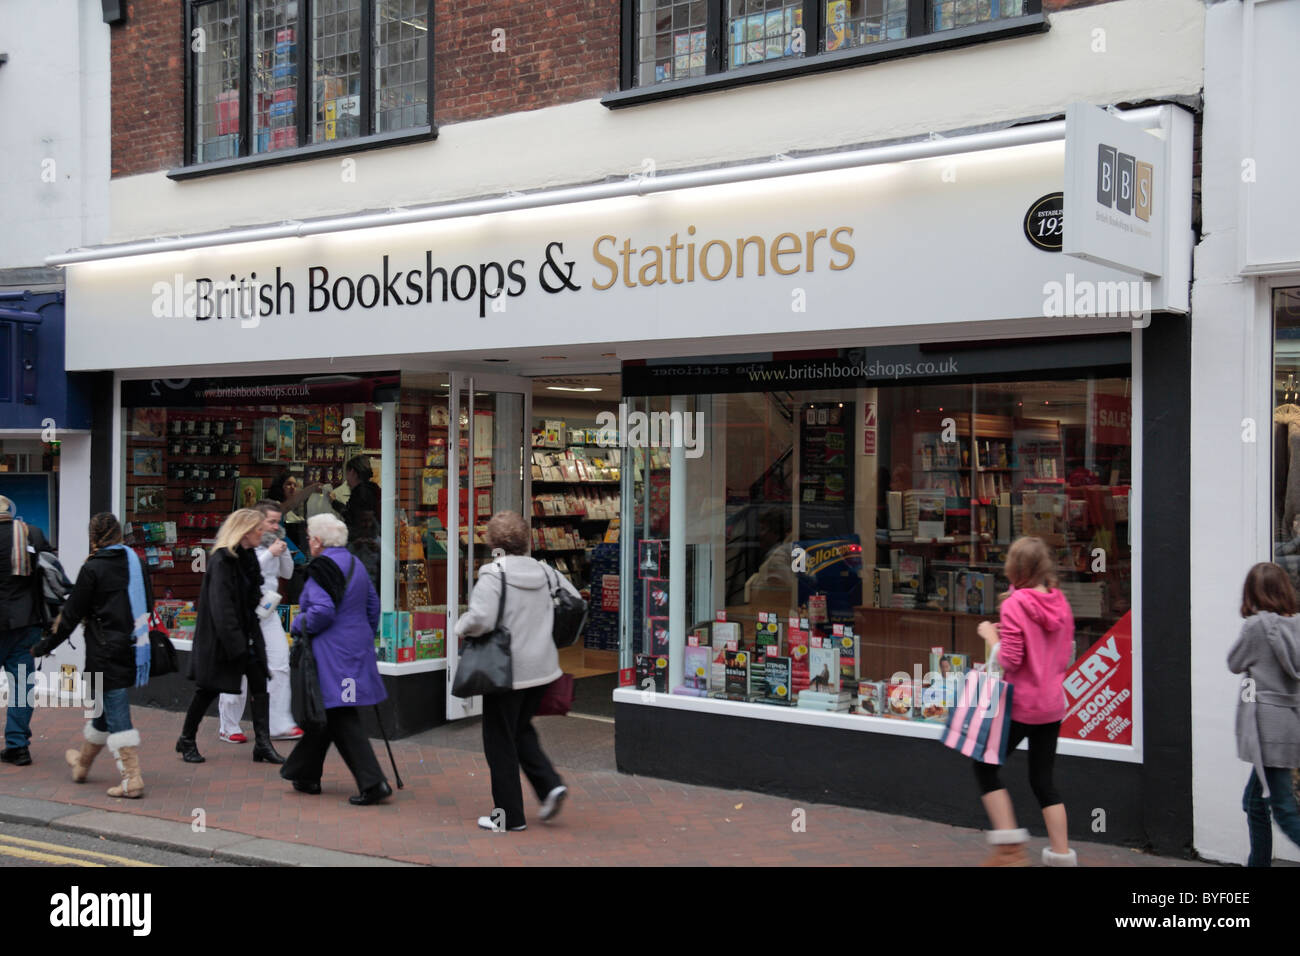 The British Bookshops & Stationers outlet in Richmond Upon Thames, UK. Stock Photo